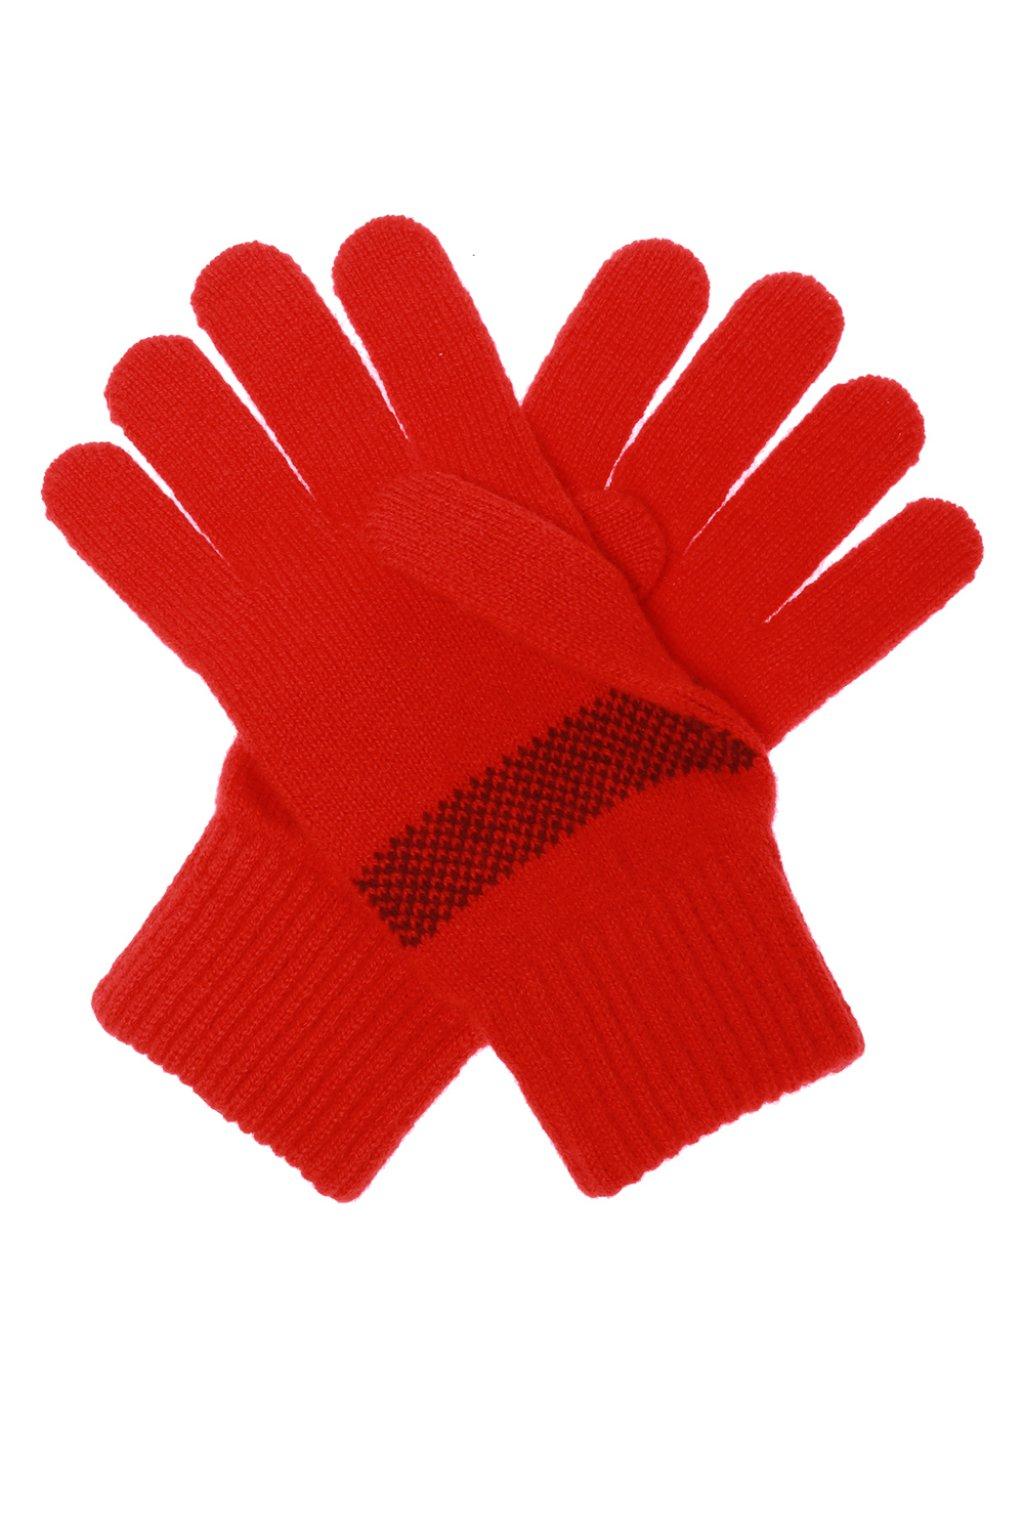 Paul Smith Wool Gloves in Red - Lyst